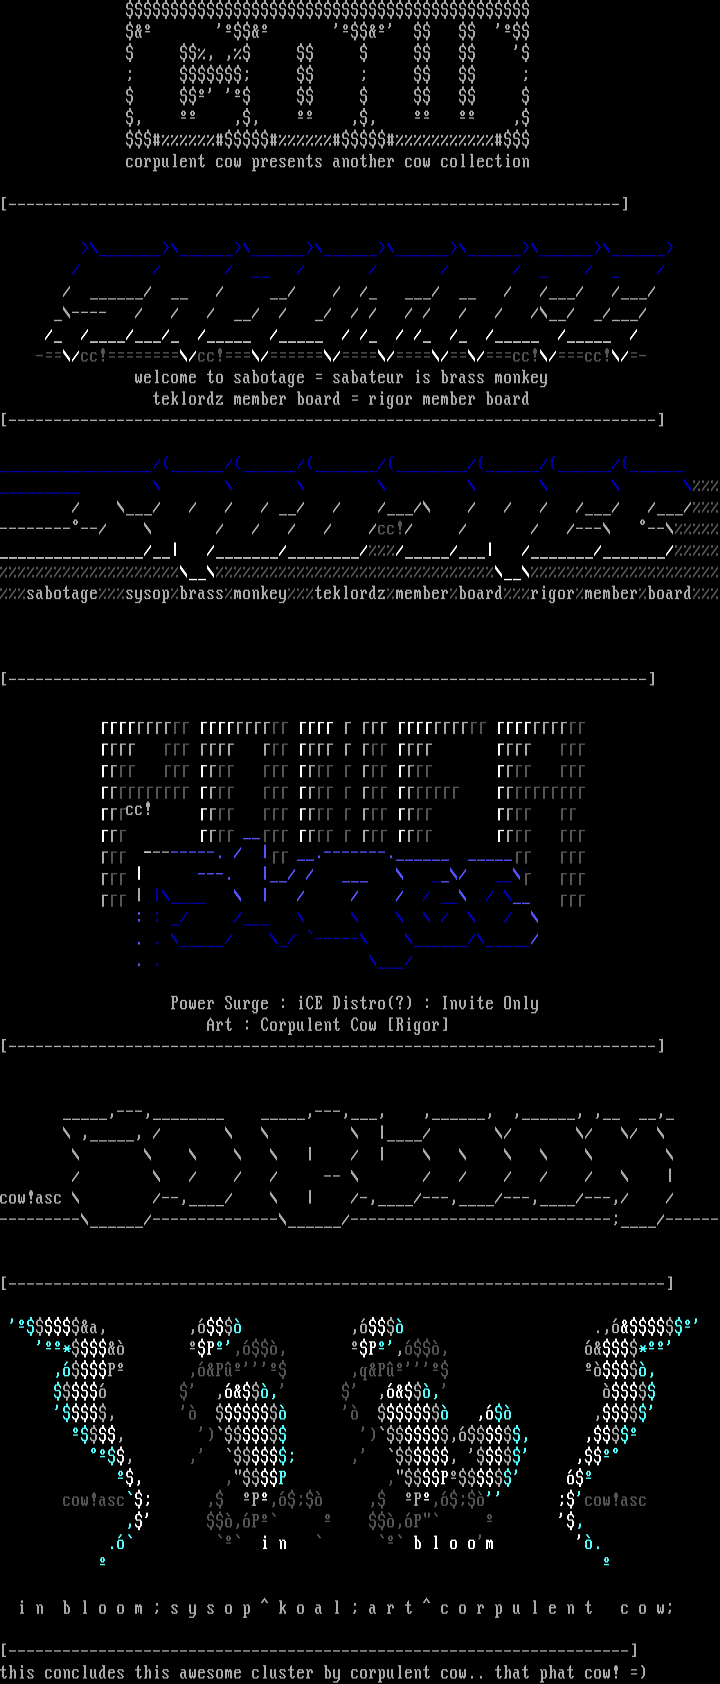 Ascii Cluster by Corpulent Cow